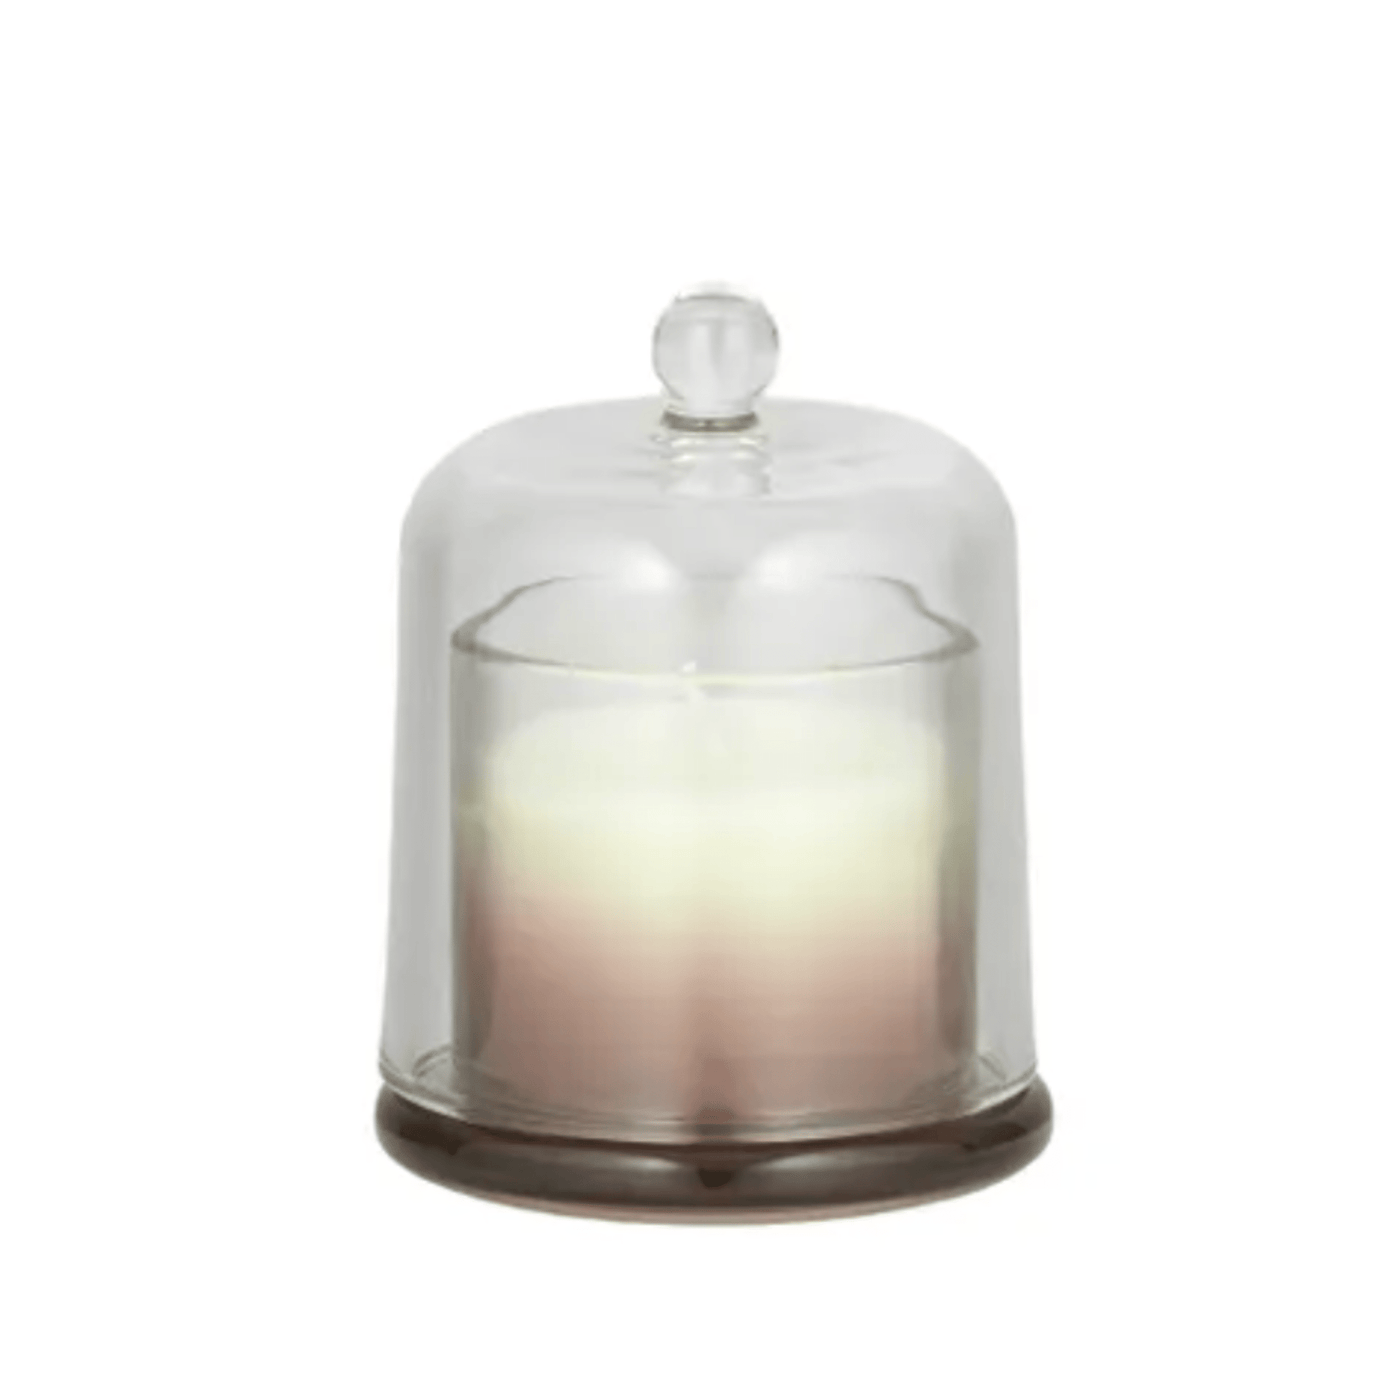 Cloche Candle